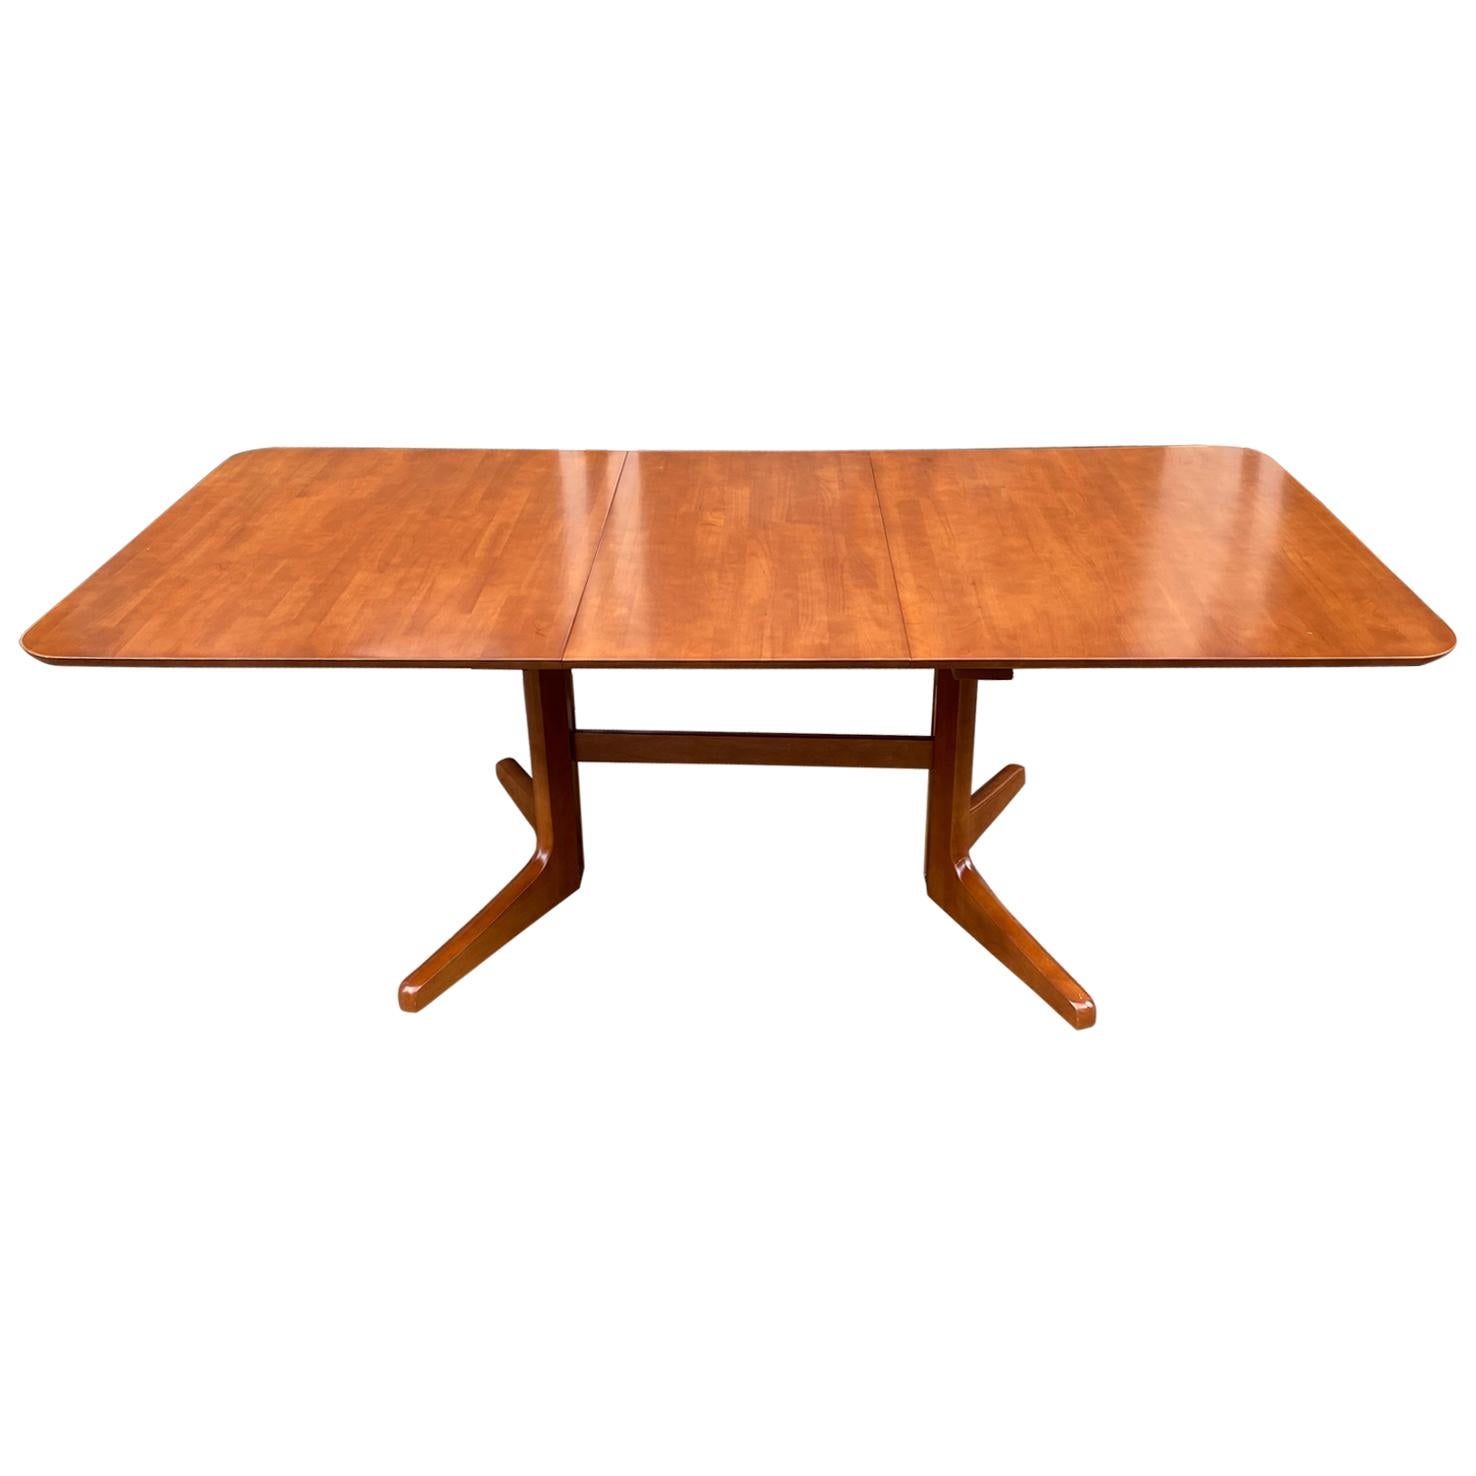 Dane Decor Dining Table with 1 Leaf